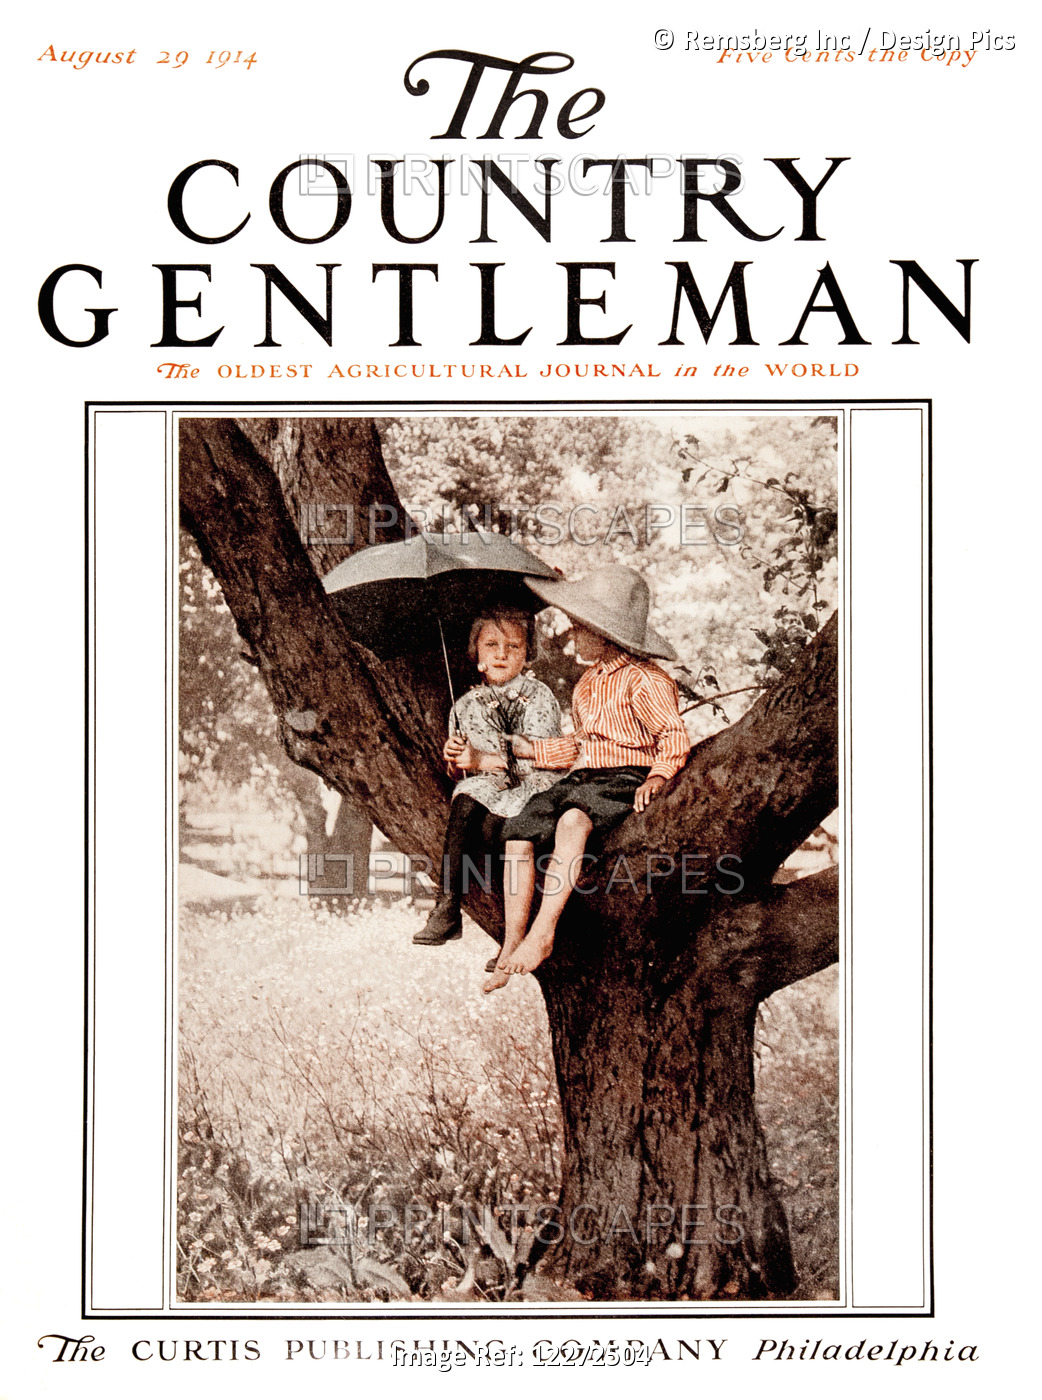 Cover Of Country Gentleman Agricultural Magazine From The Early 20th Century. .